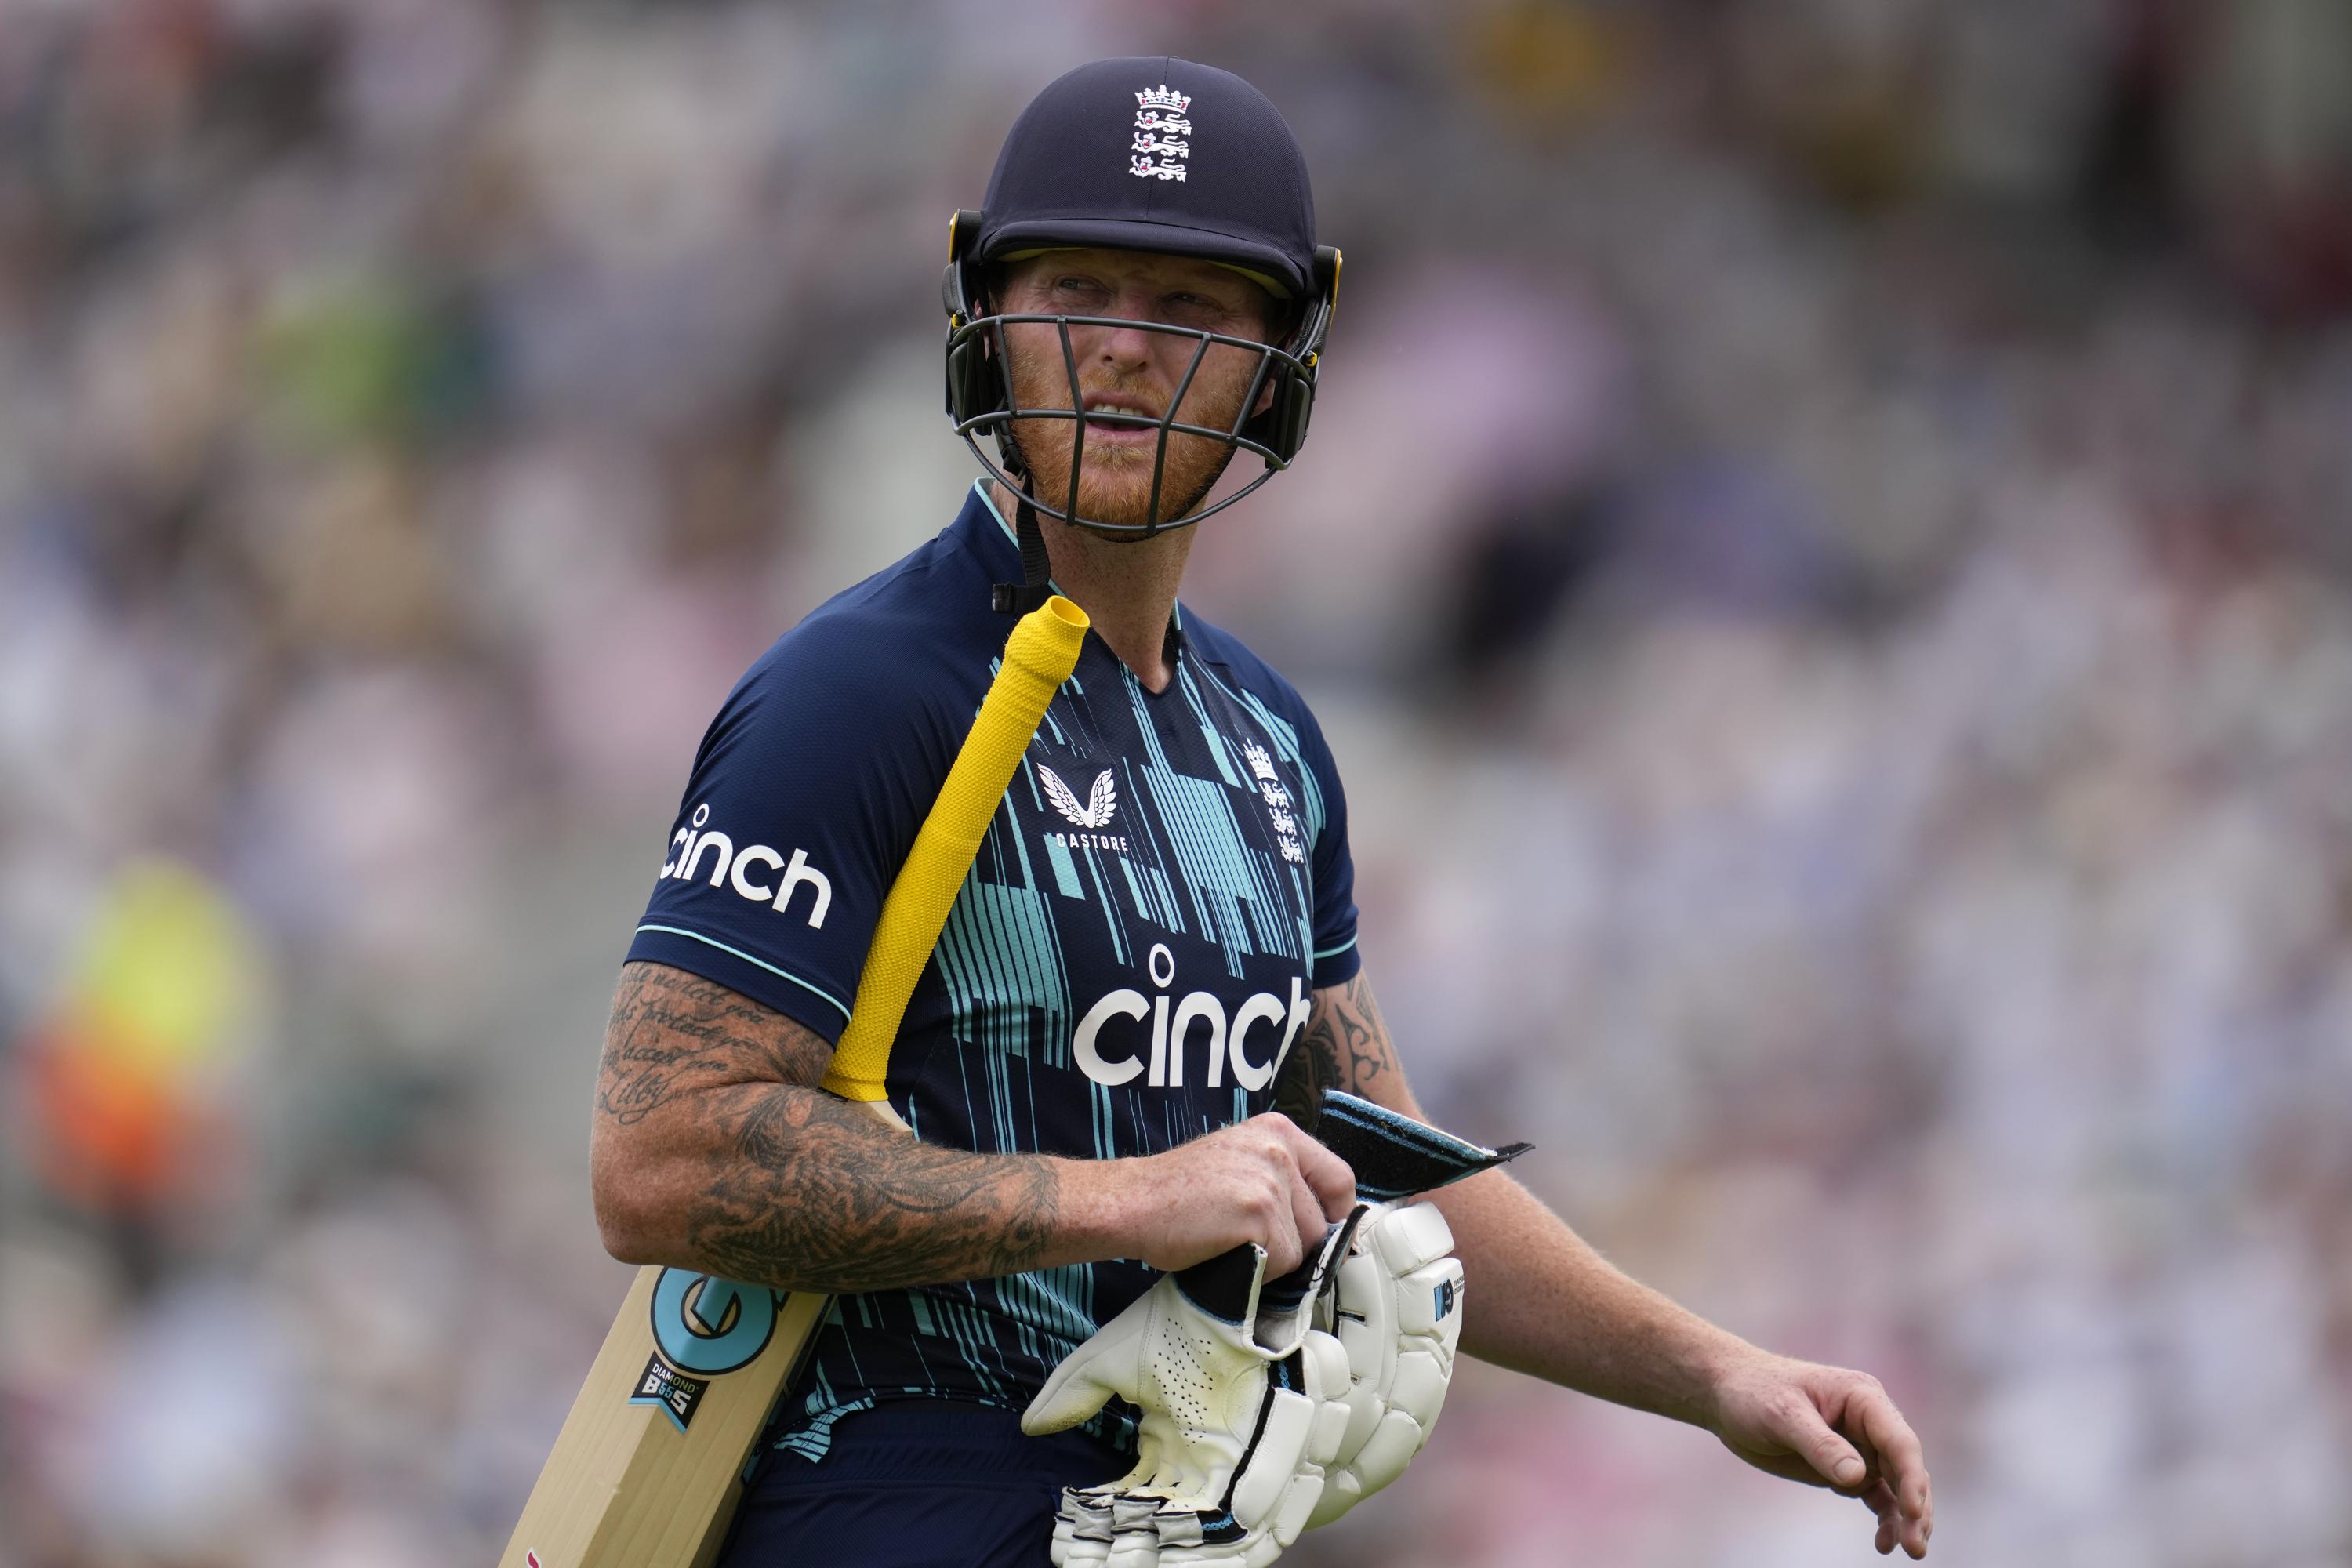 Ben Stokes Retirement: Ben Stokes hopes ODI retirement serves as warning to cricket, says ‘too much cricket rammed in to play all three formats now’